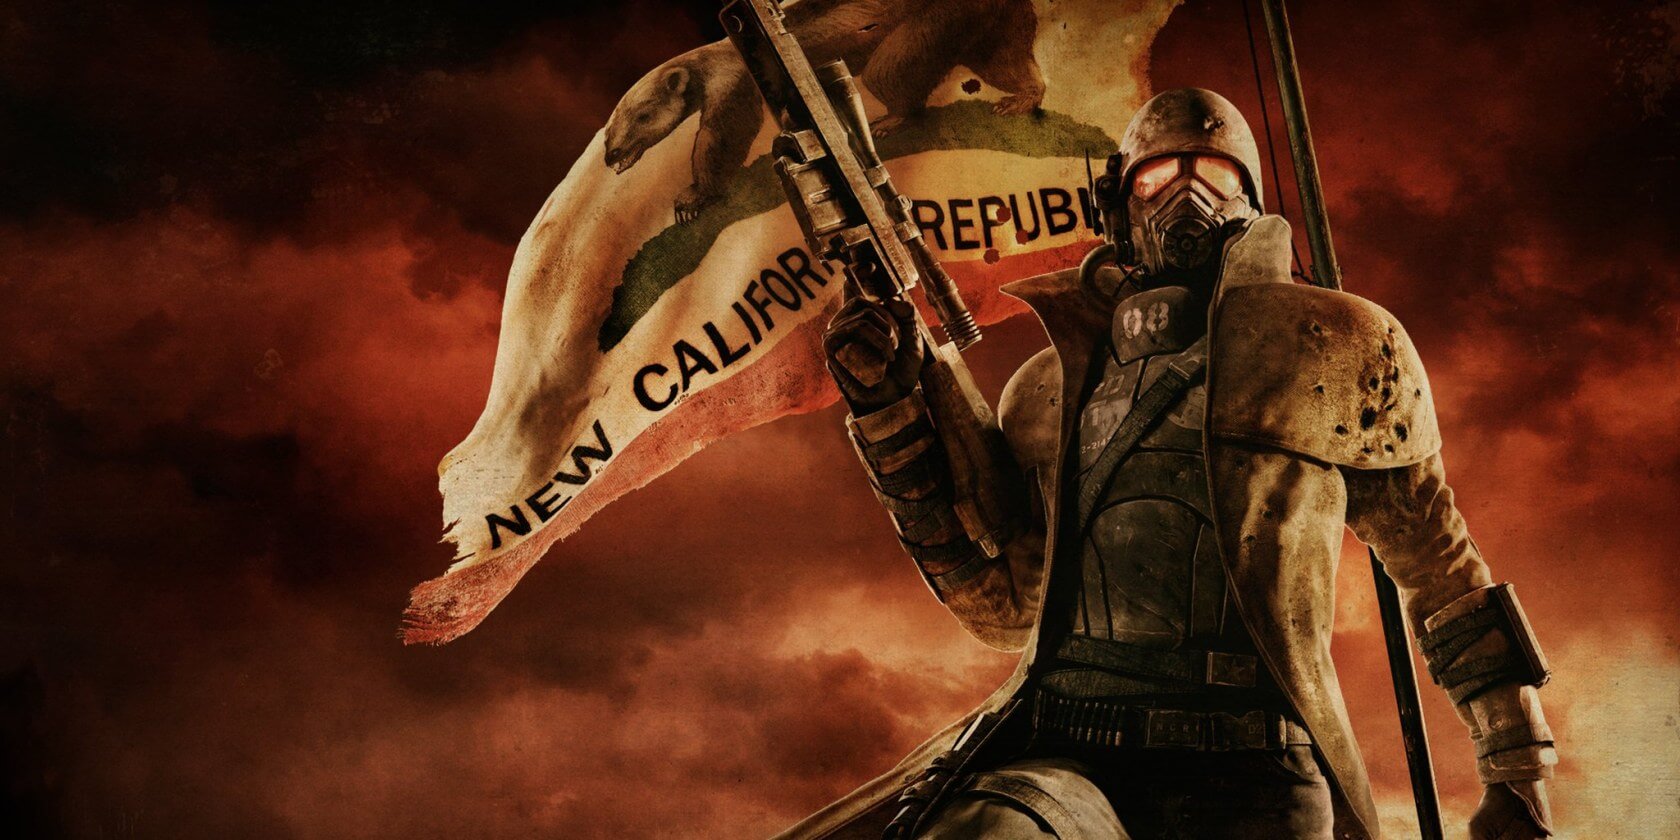 Microsoft is in early talks for a Fallout New Vegas sequel